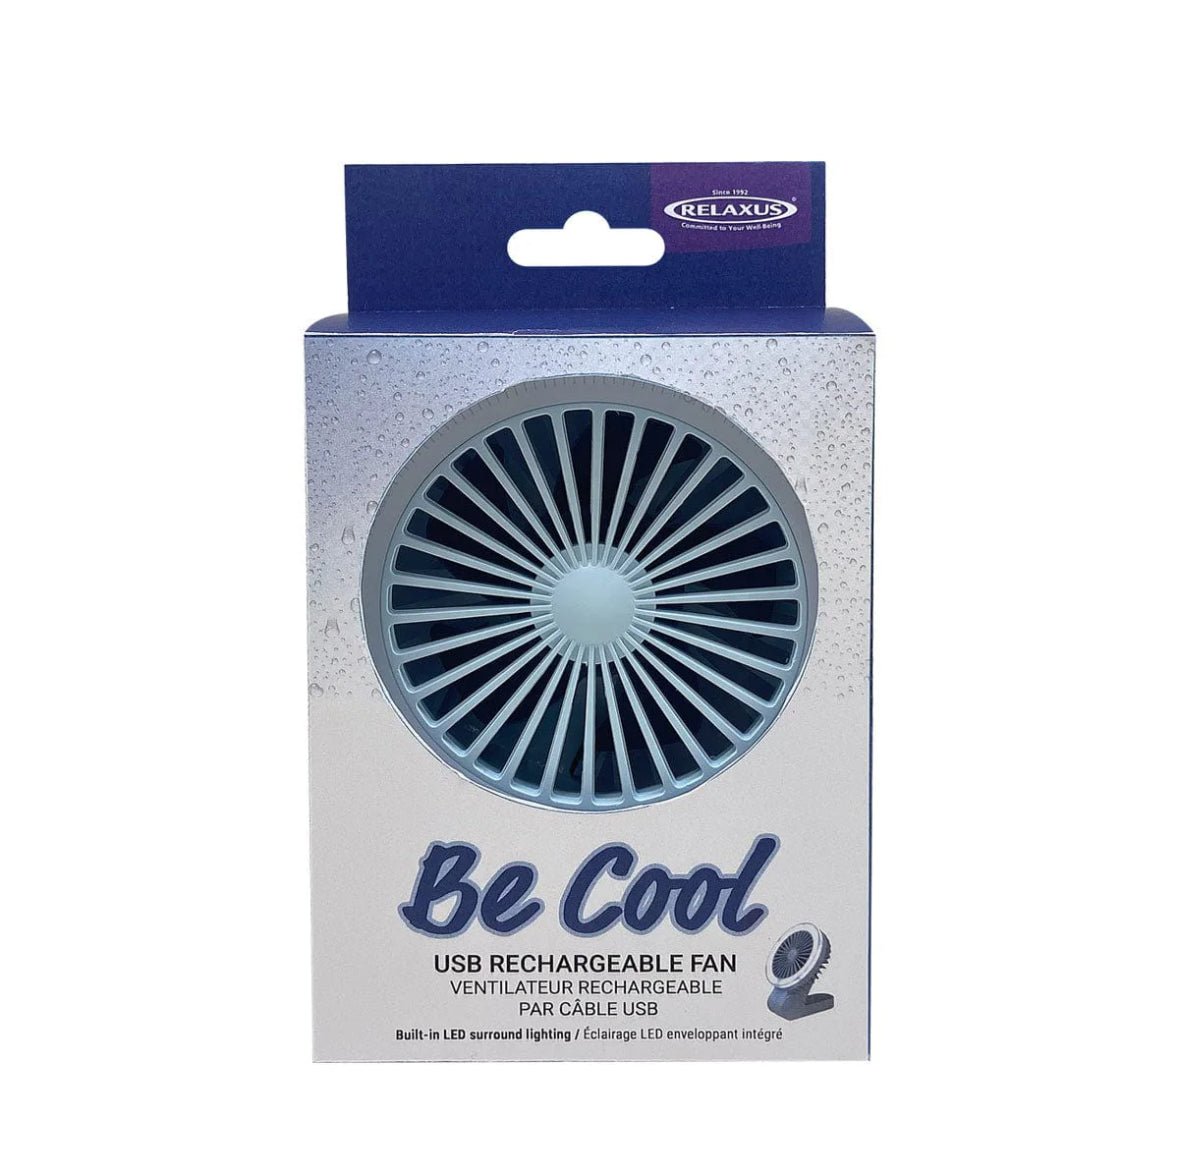 Be Cool USB Rechargeable Fan for Treatment Room, Chemical Peels